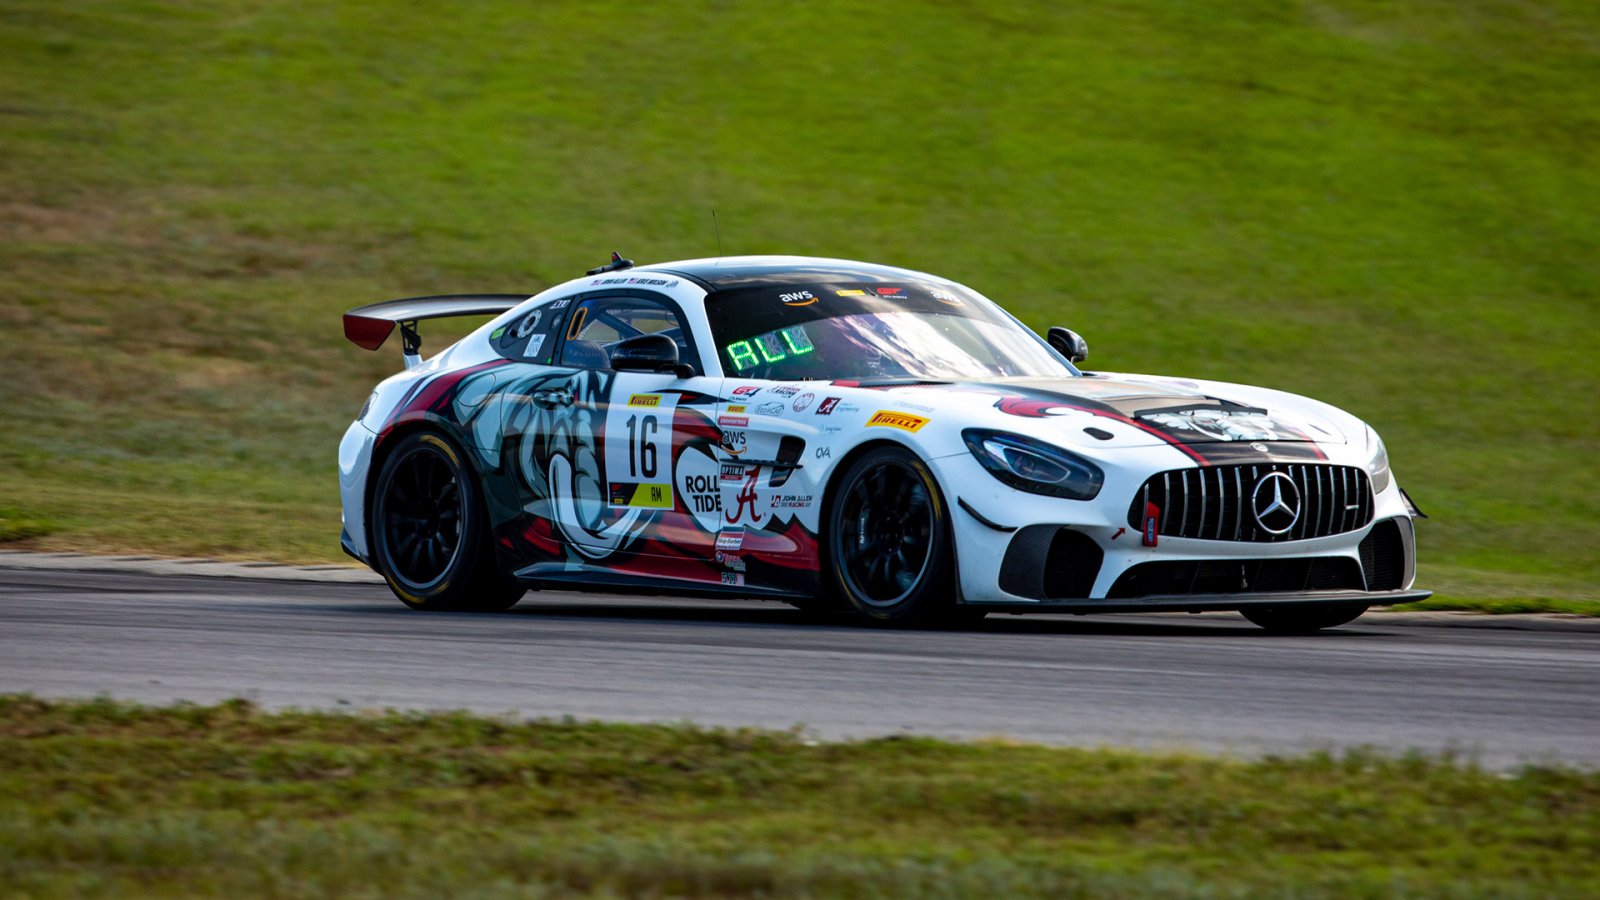 Strong Rearden Racing Pirelli GT4 America Lineup Set for Sonoma this Weekend in SRO America Road Racing Action 